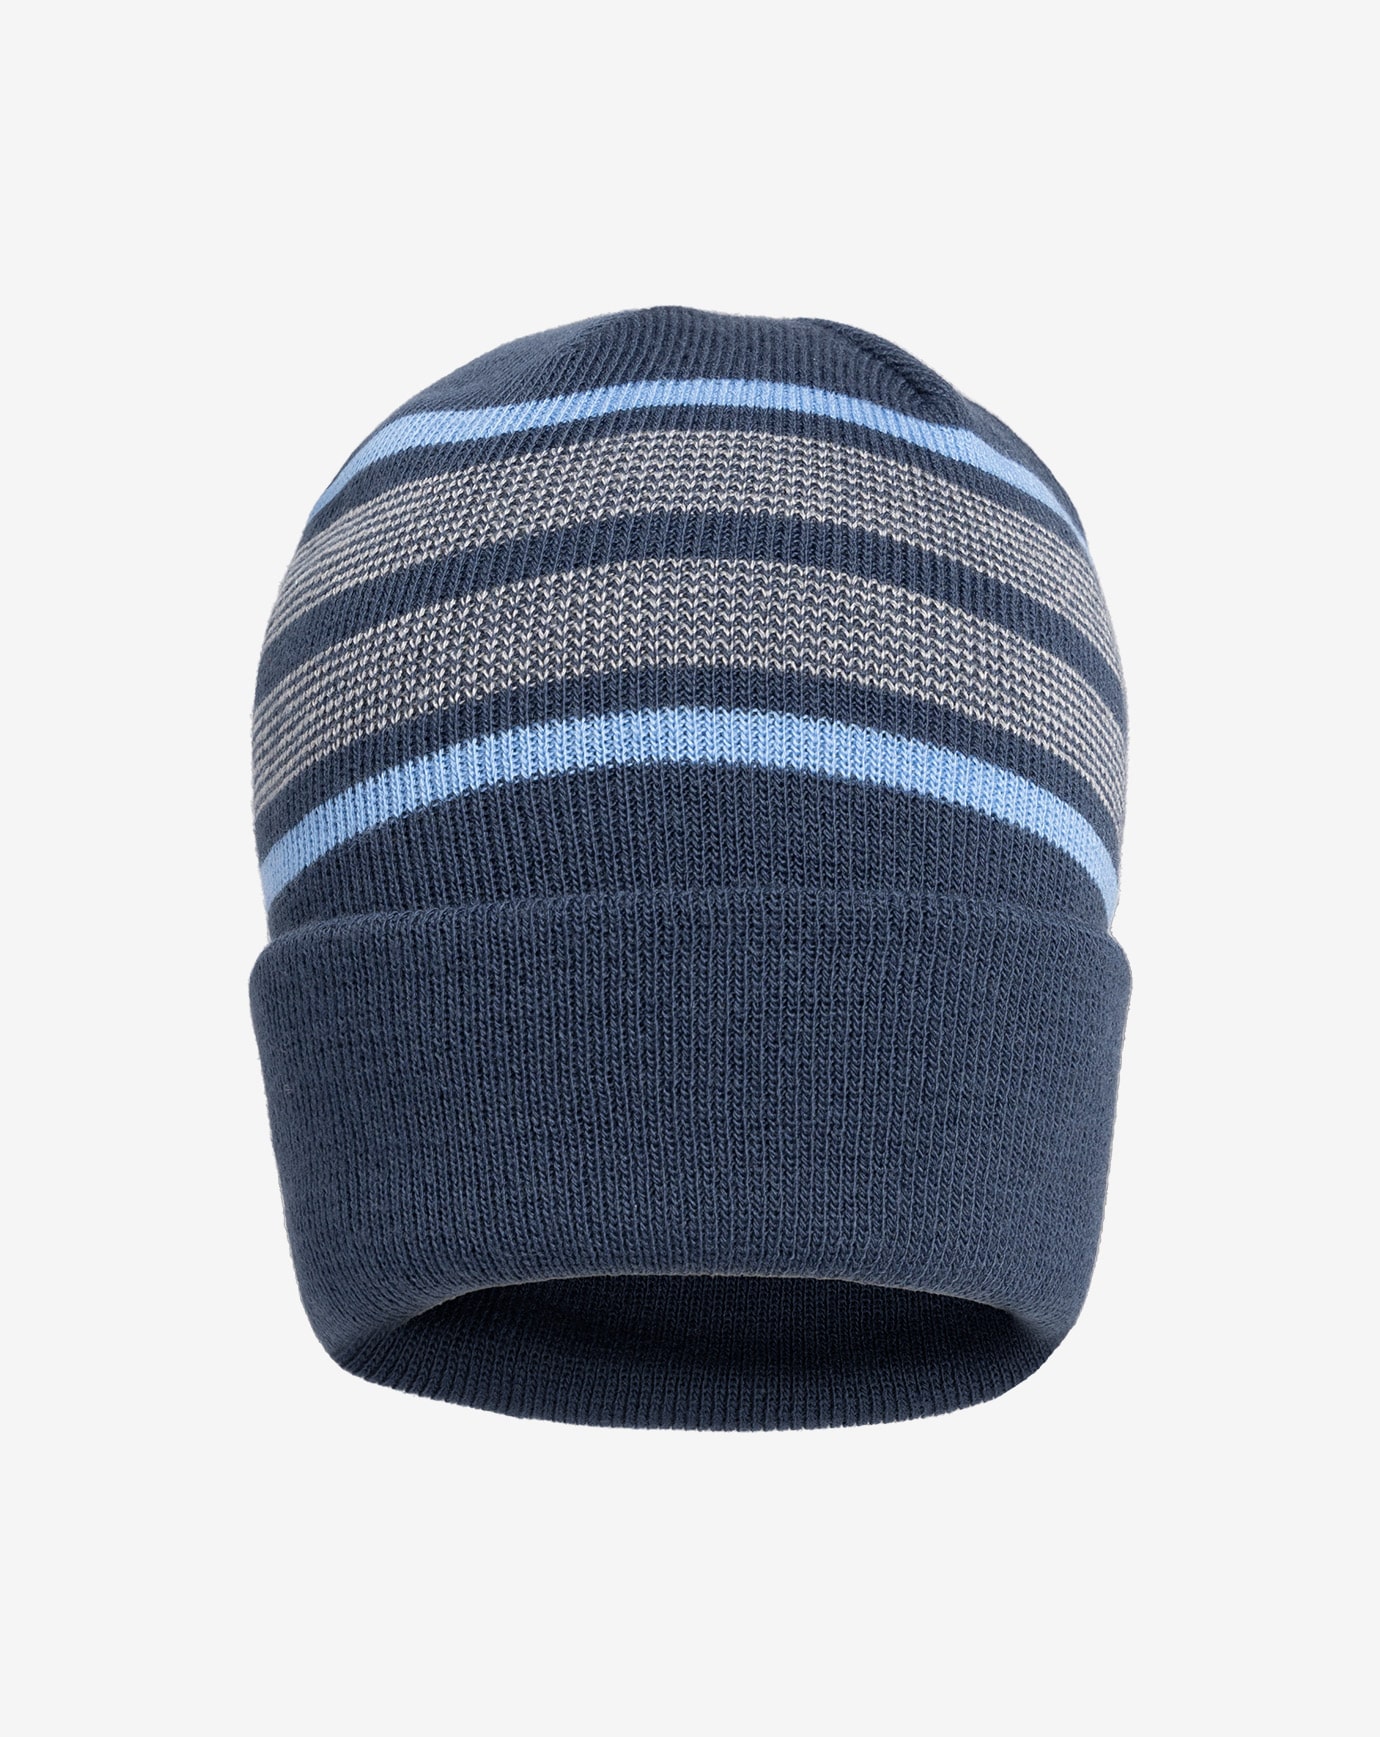 Related Product - END OF YEAR BONUS BEANIE